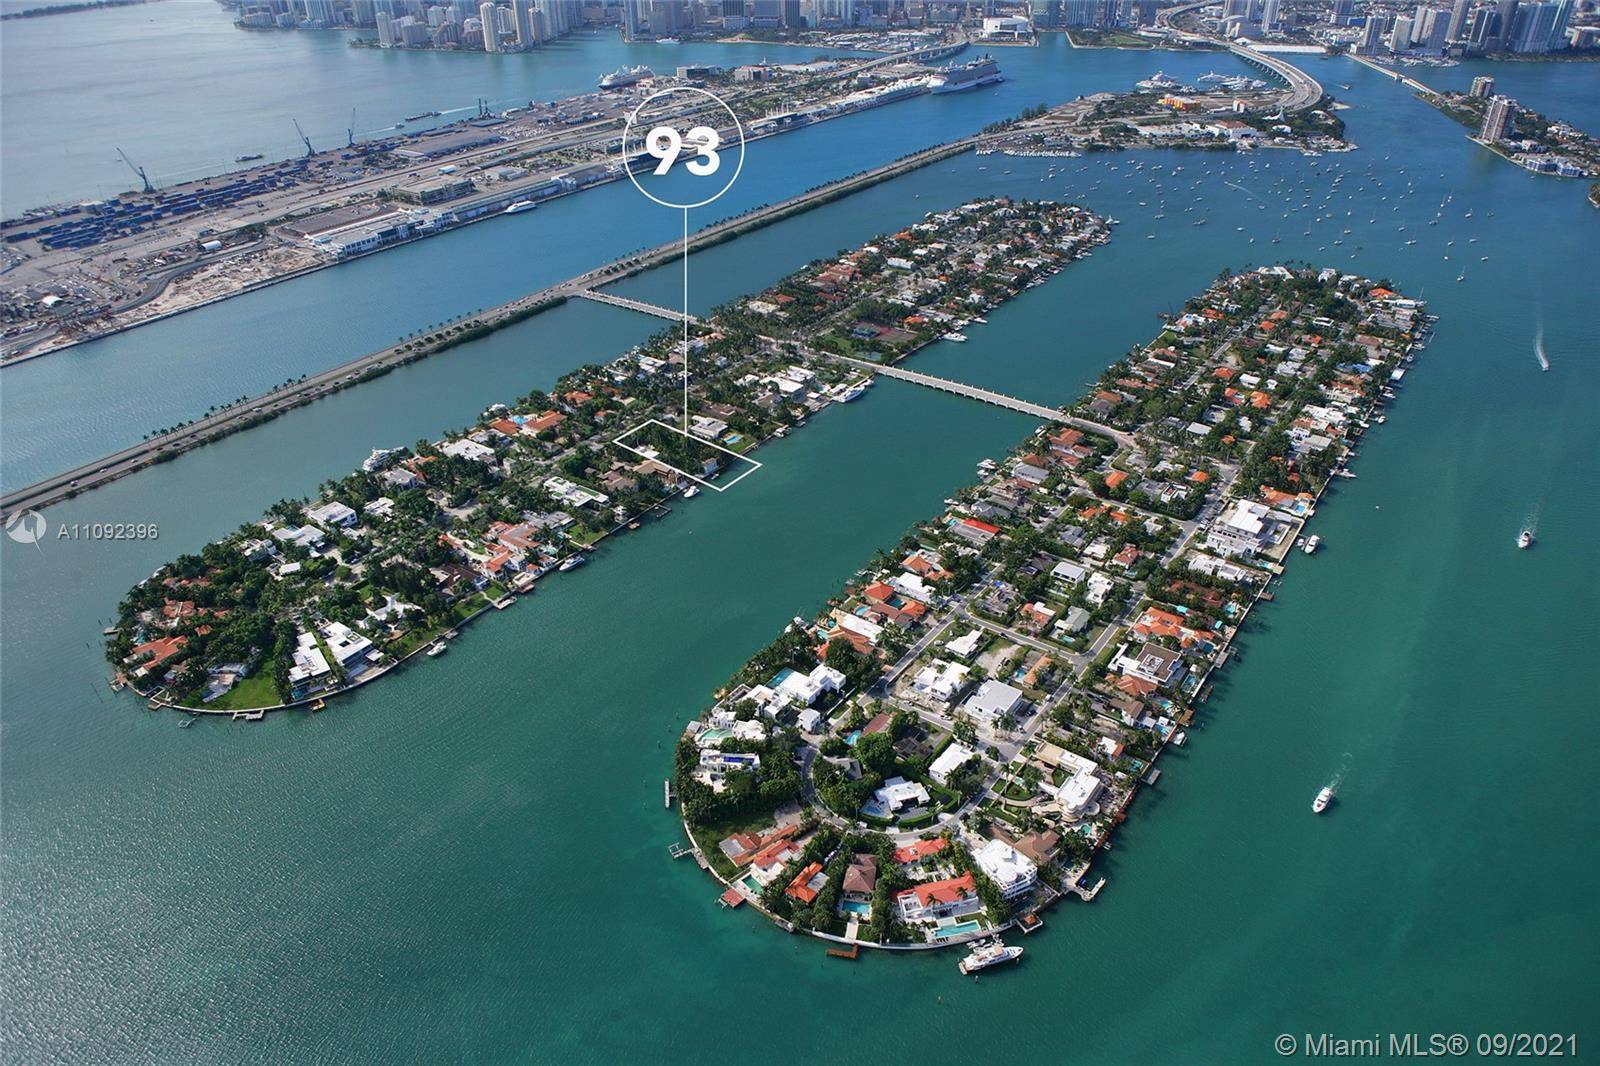 93 Palm Ave is the best deal for a large waterfront lot on Miami Beach !